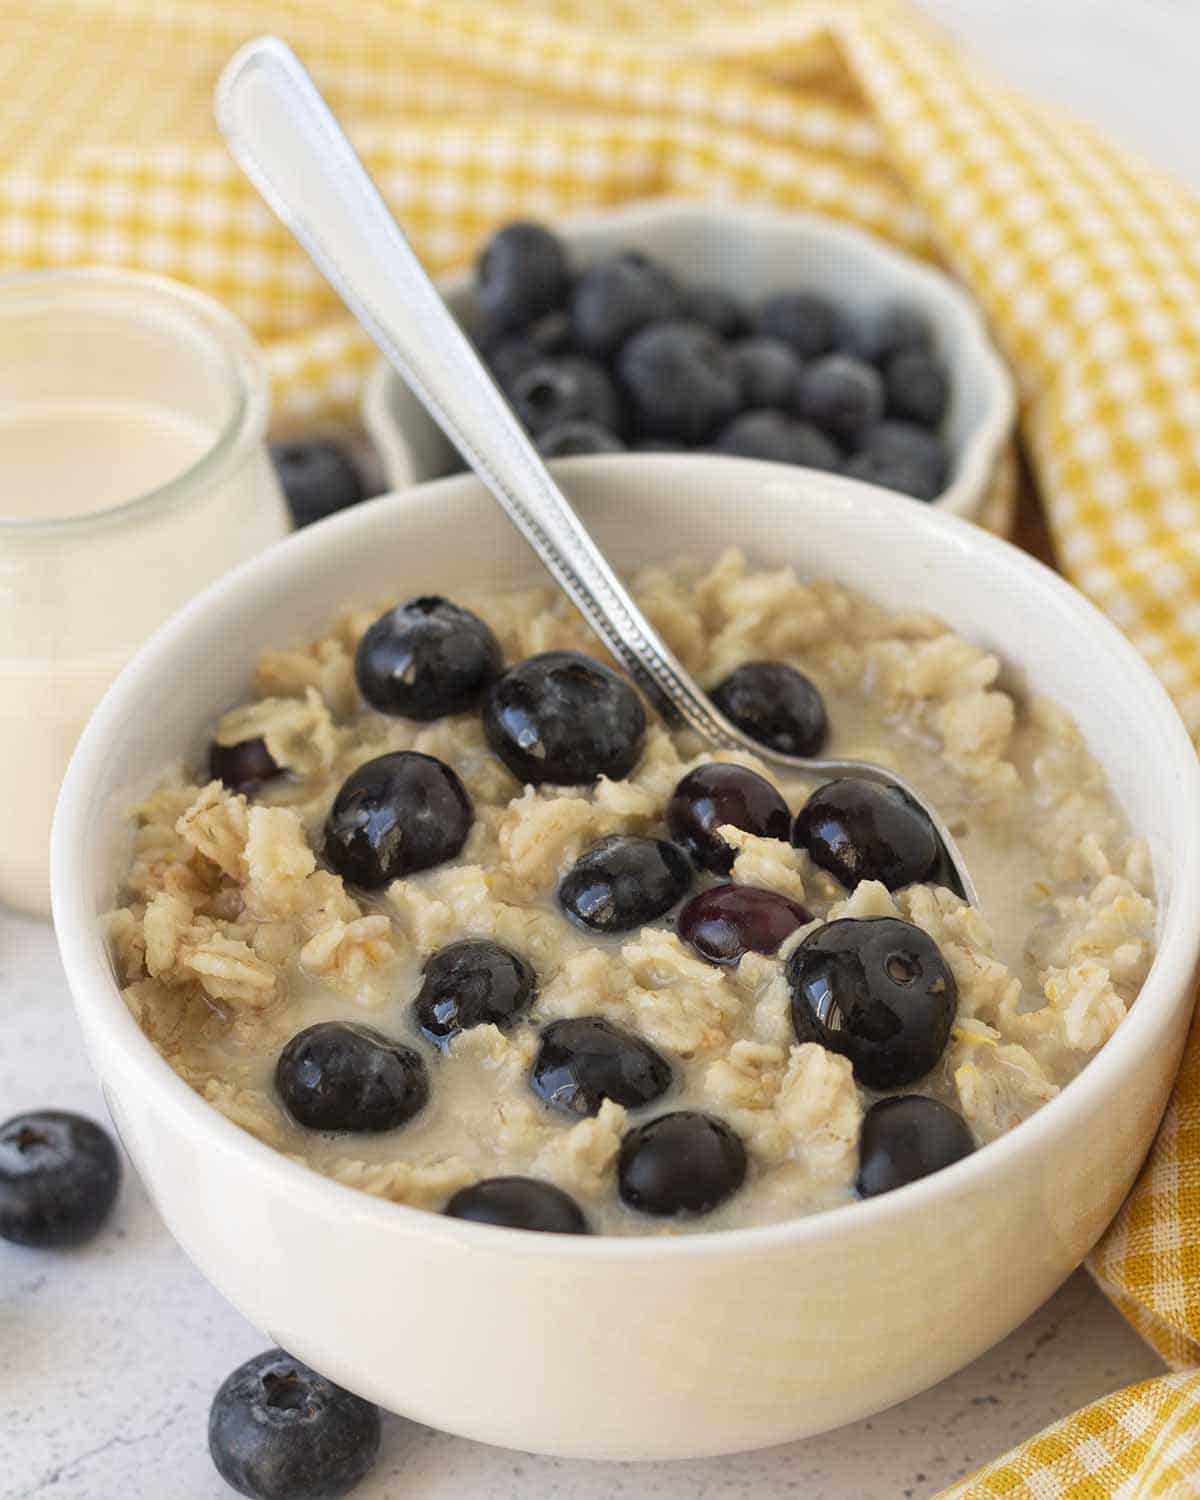 Image shows a white bowl sitting on a white table, the bowl is filled with lemon blueberry oatmeal.